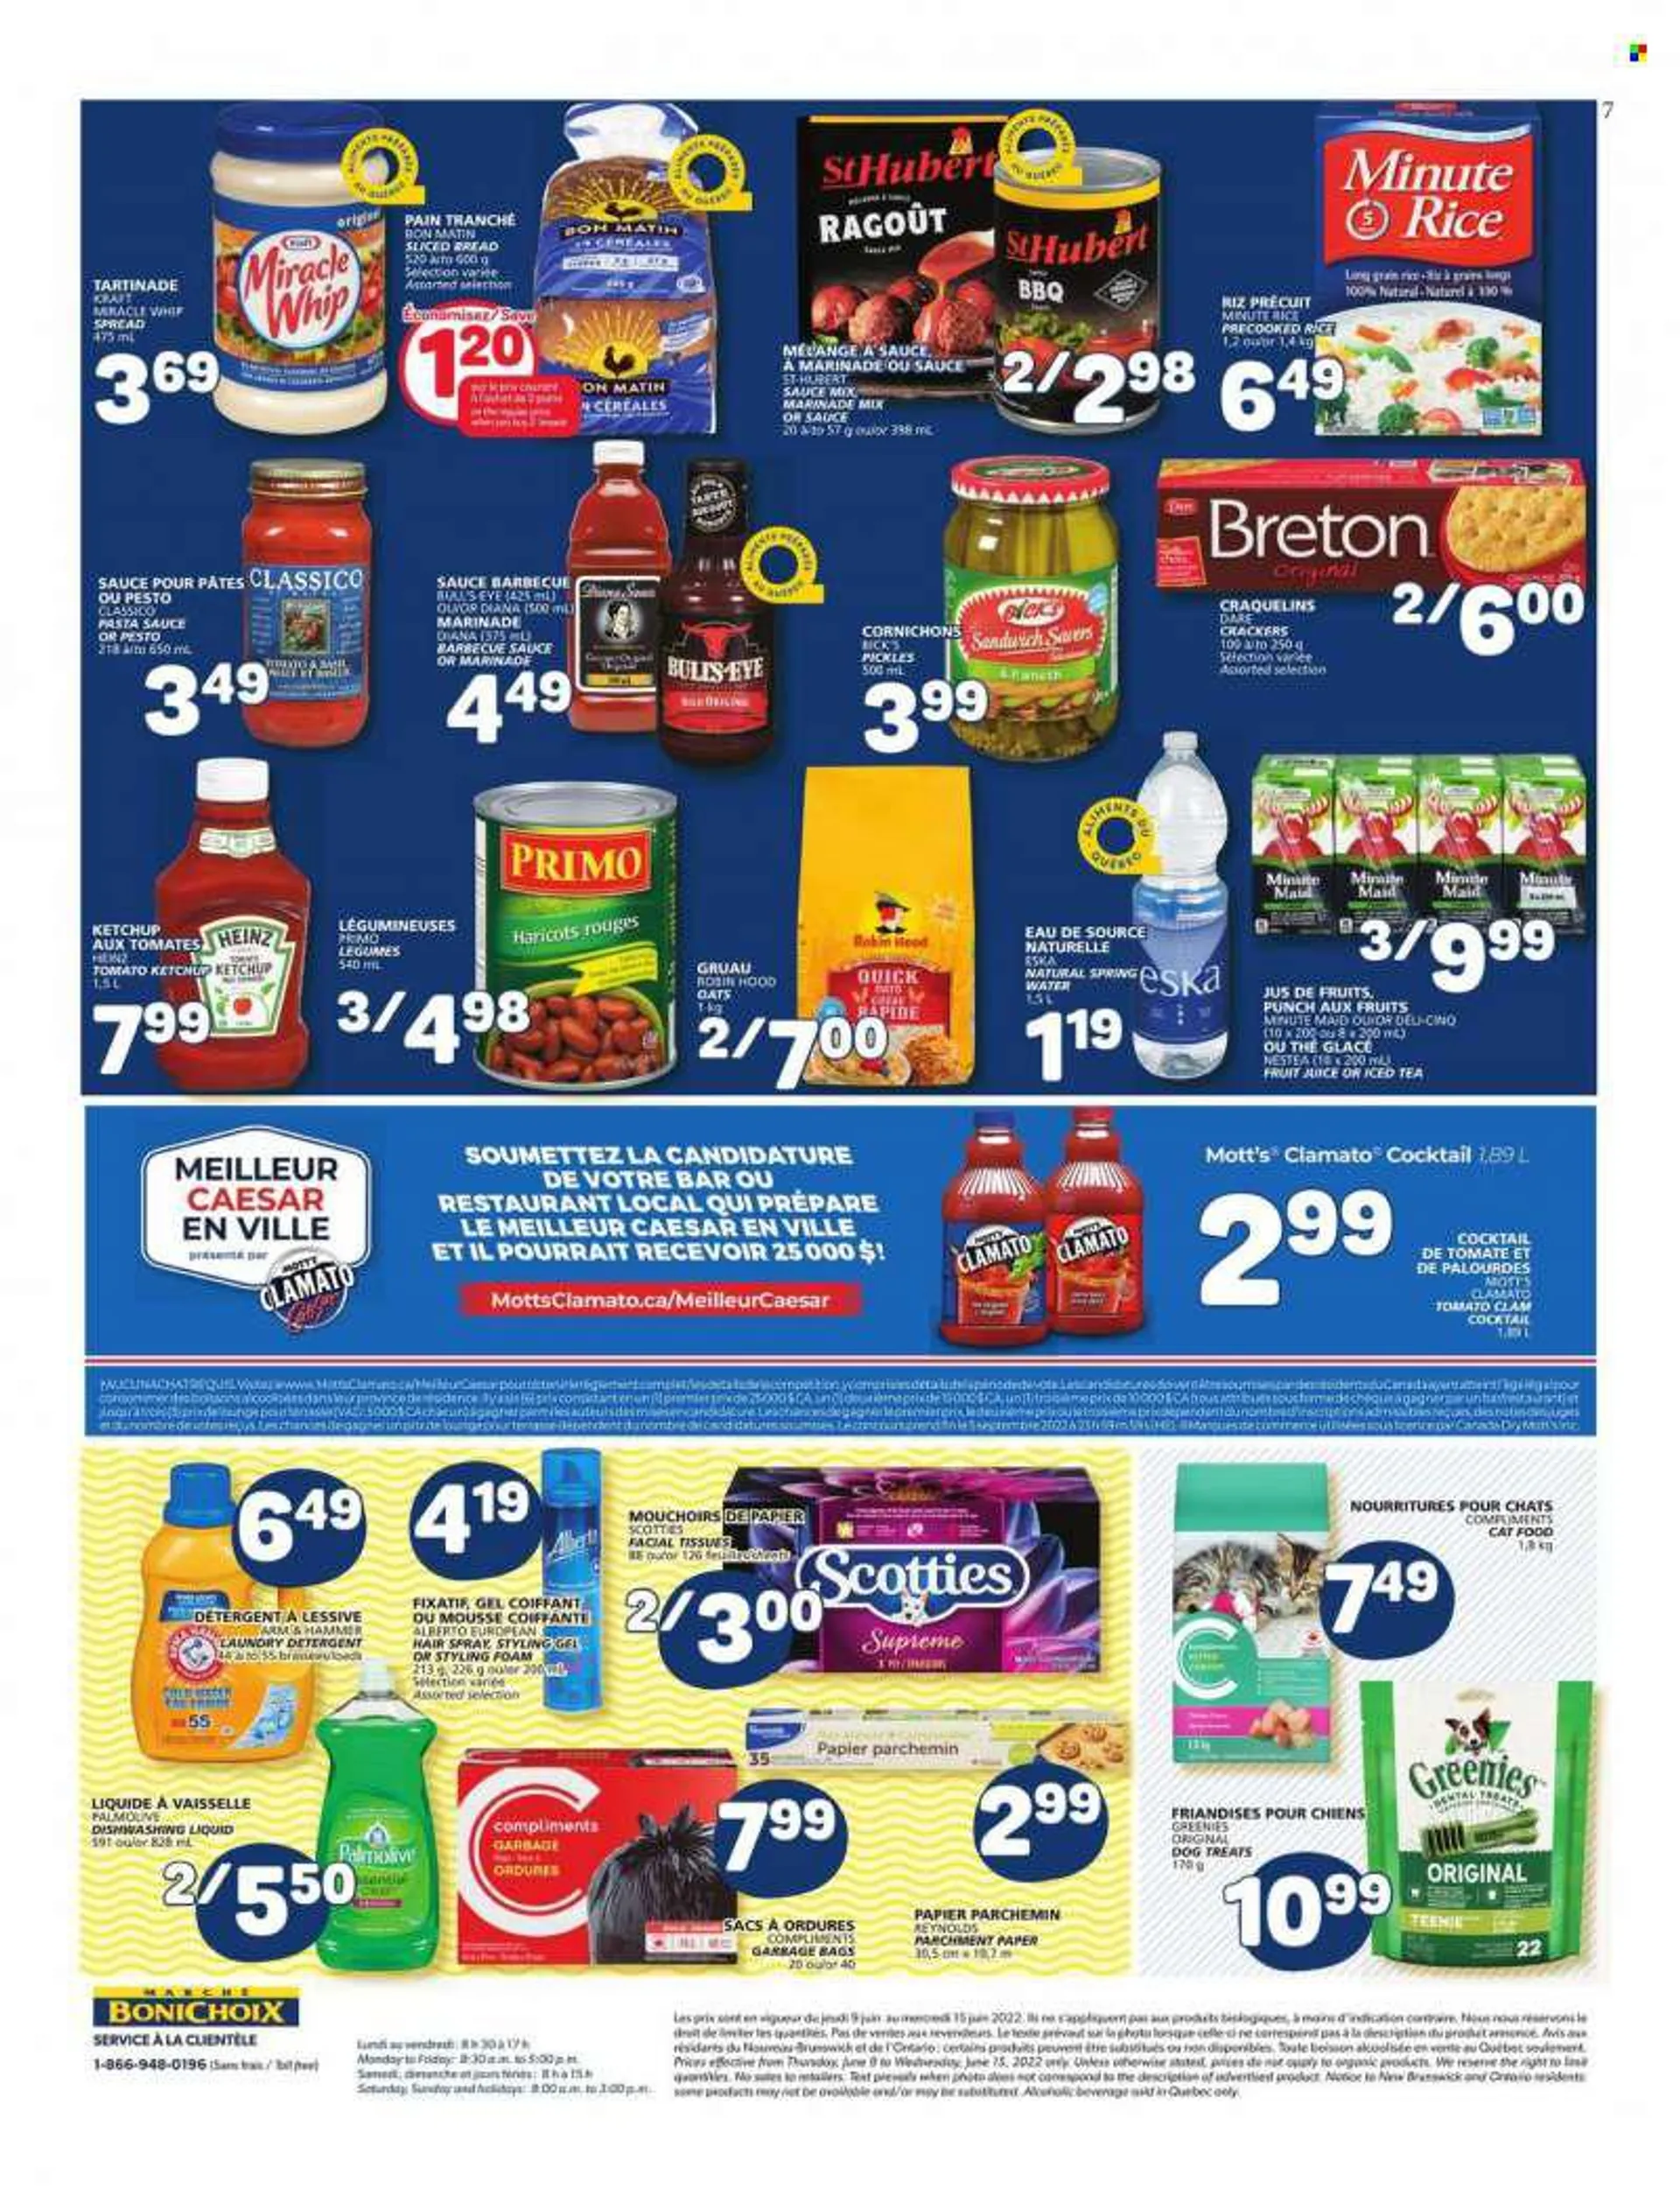 Marché Bonichoix Flyer - June 09, 2022 - June 15, 2022 - Sales products - bread, Motts, clams, pasta sauce, sandwich, Kraft®, Miracle Whip, crackers, ARM &amp; HAMMER, oats, pickles, Quick Oats, rice, long grain rice, barbecue sauce, marinade, Classico, C